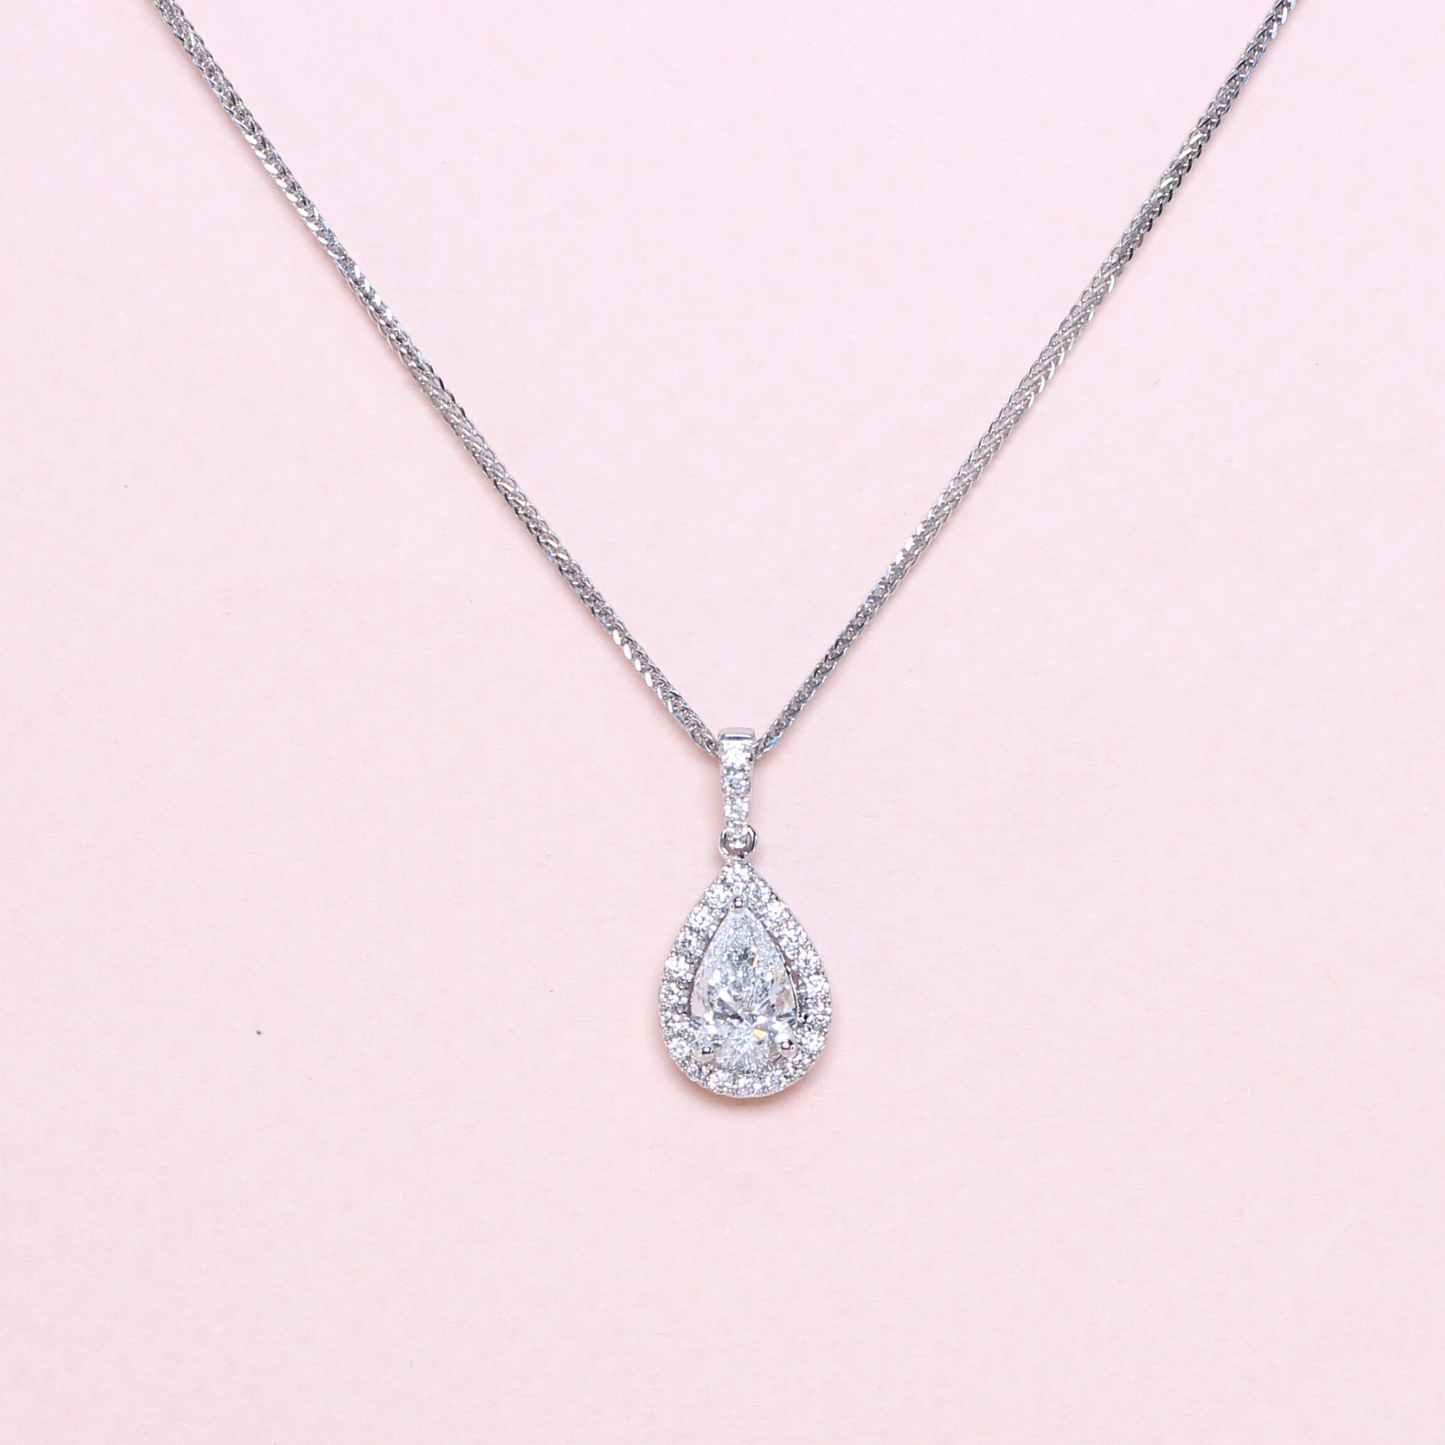 1.05ct Pear necklace with Halo